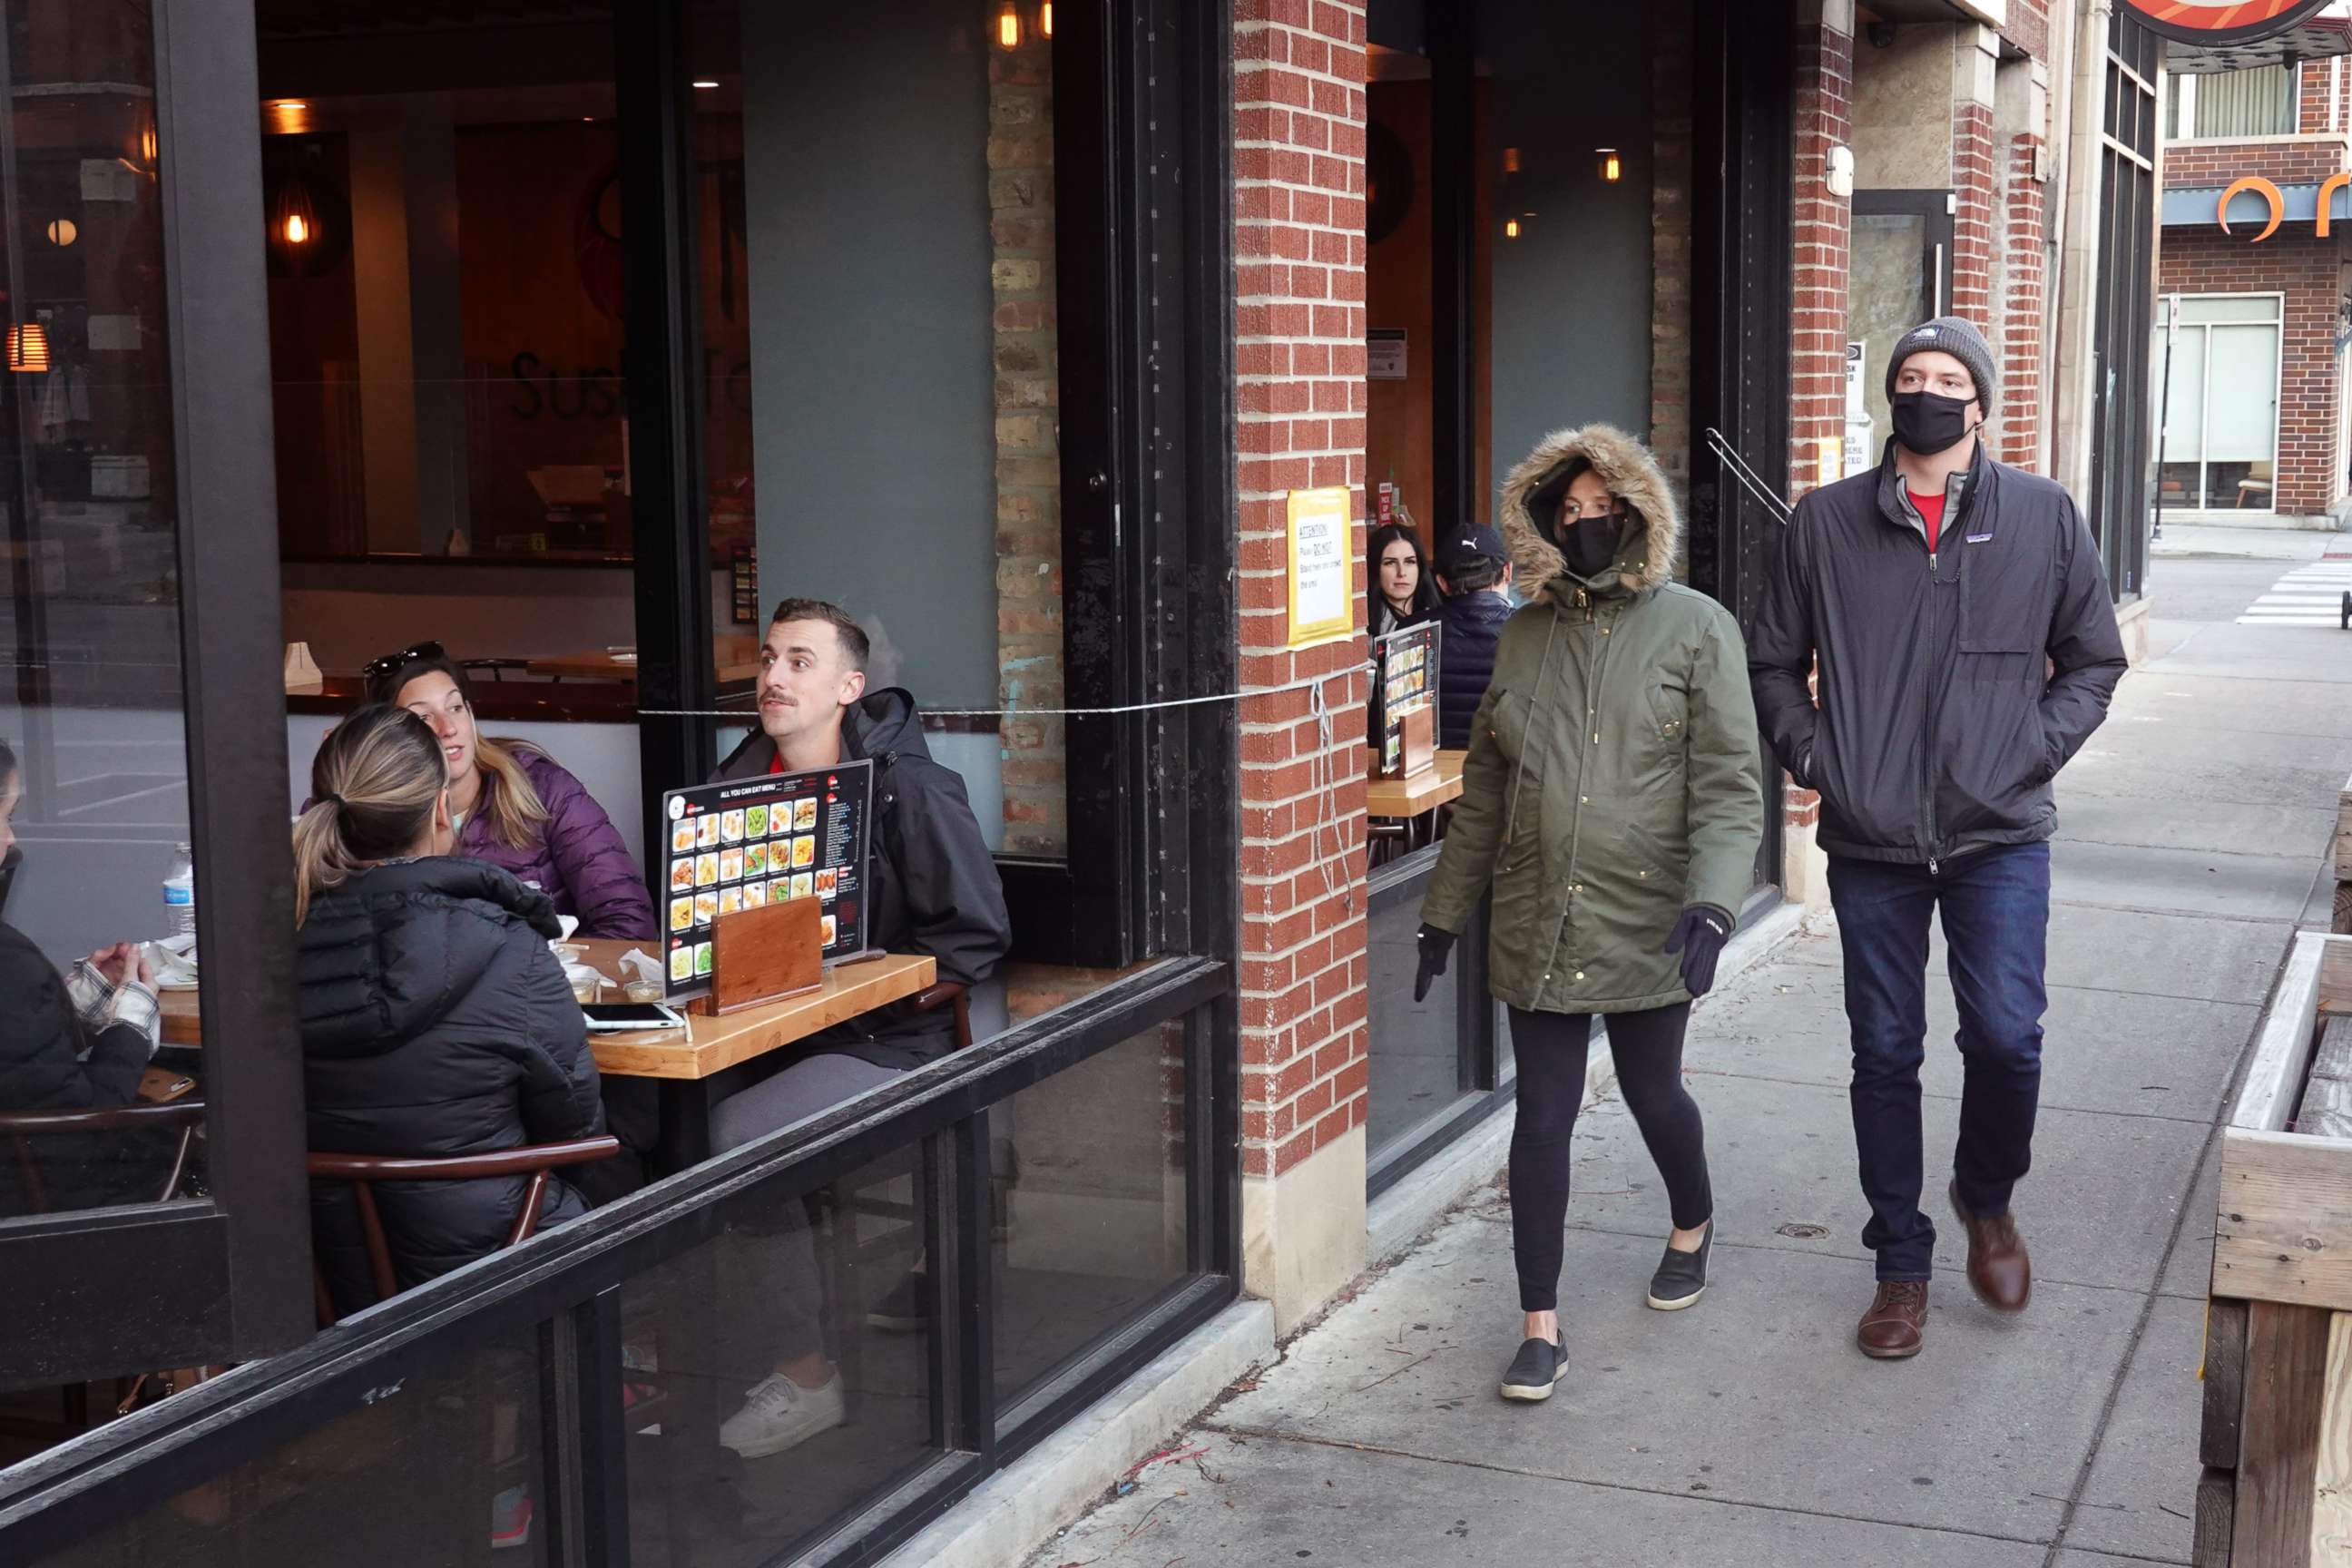 PHOTO: Despite temperatures in the mid-forties, customers continue to patronize restaurants and bars in the Wicker Park neighborhood on Nov. 11, 2020, in Chicago.